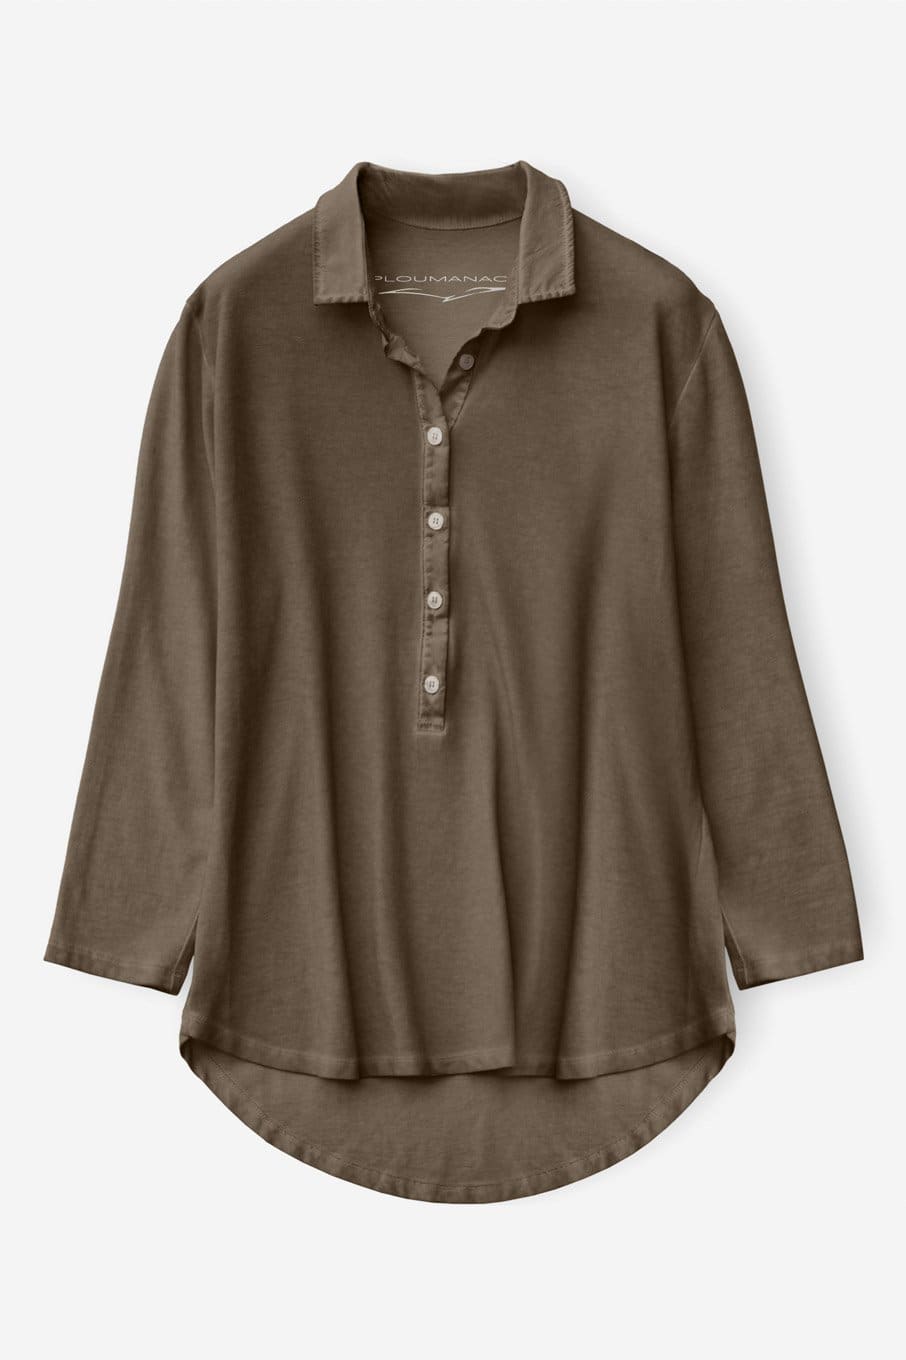 Loose Fit Piquet Polo Shirt - Coconut Brown - Polos